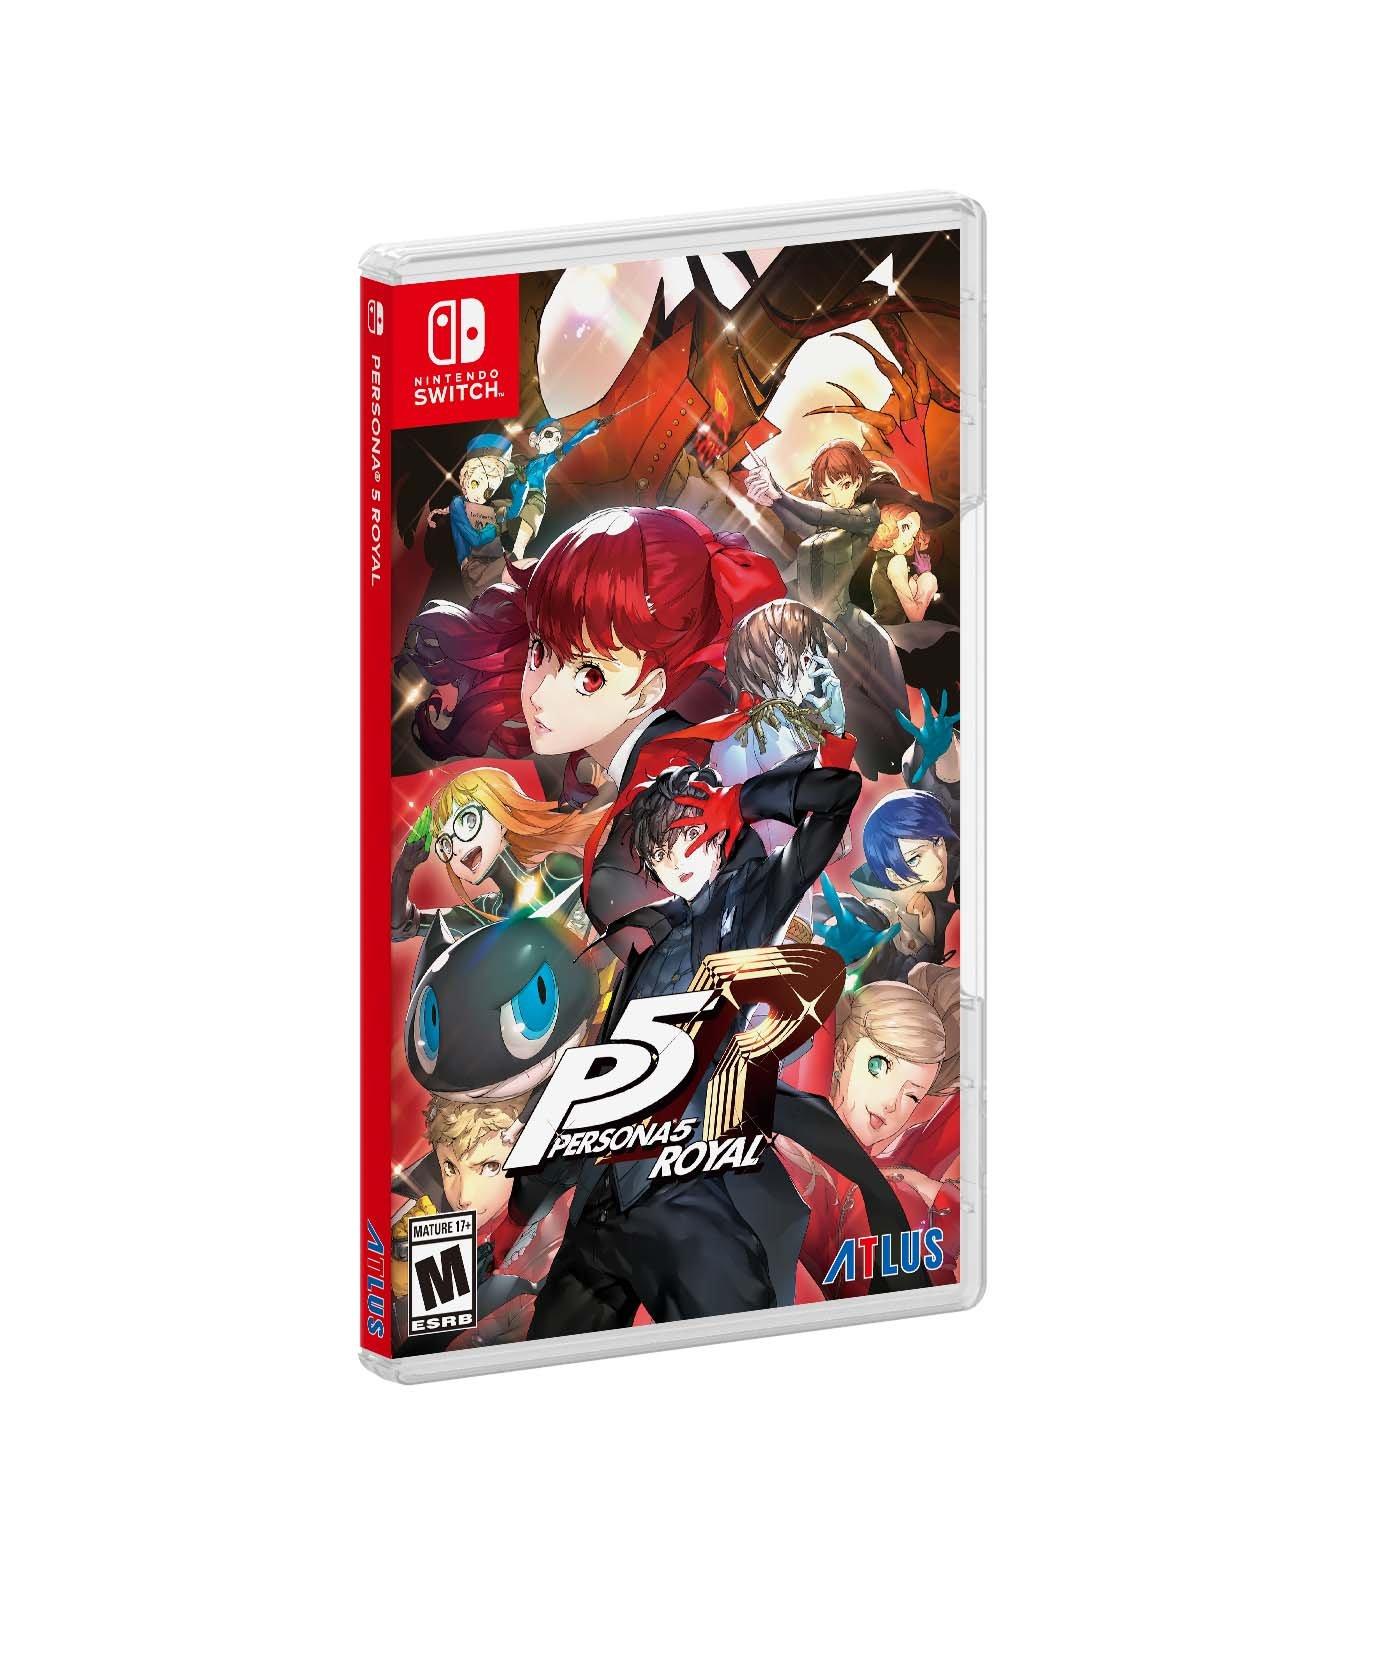 Persona 5 Royal Steelbook Edition Nintendo Switch Unboxing Video